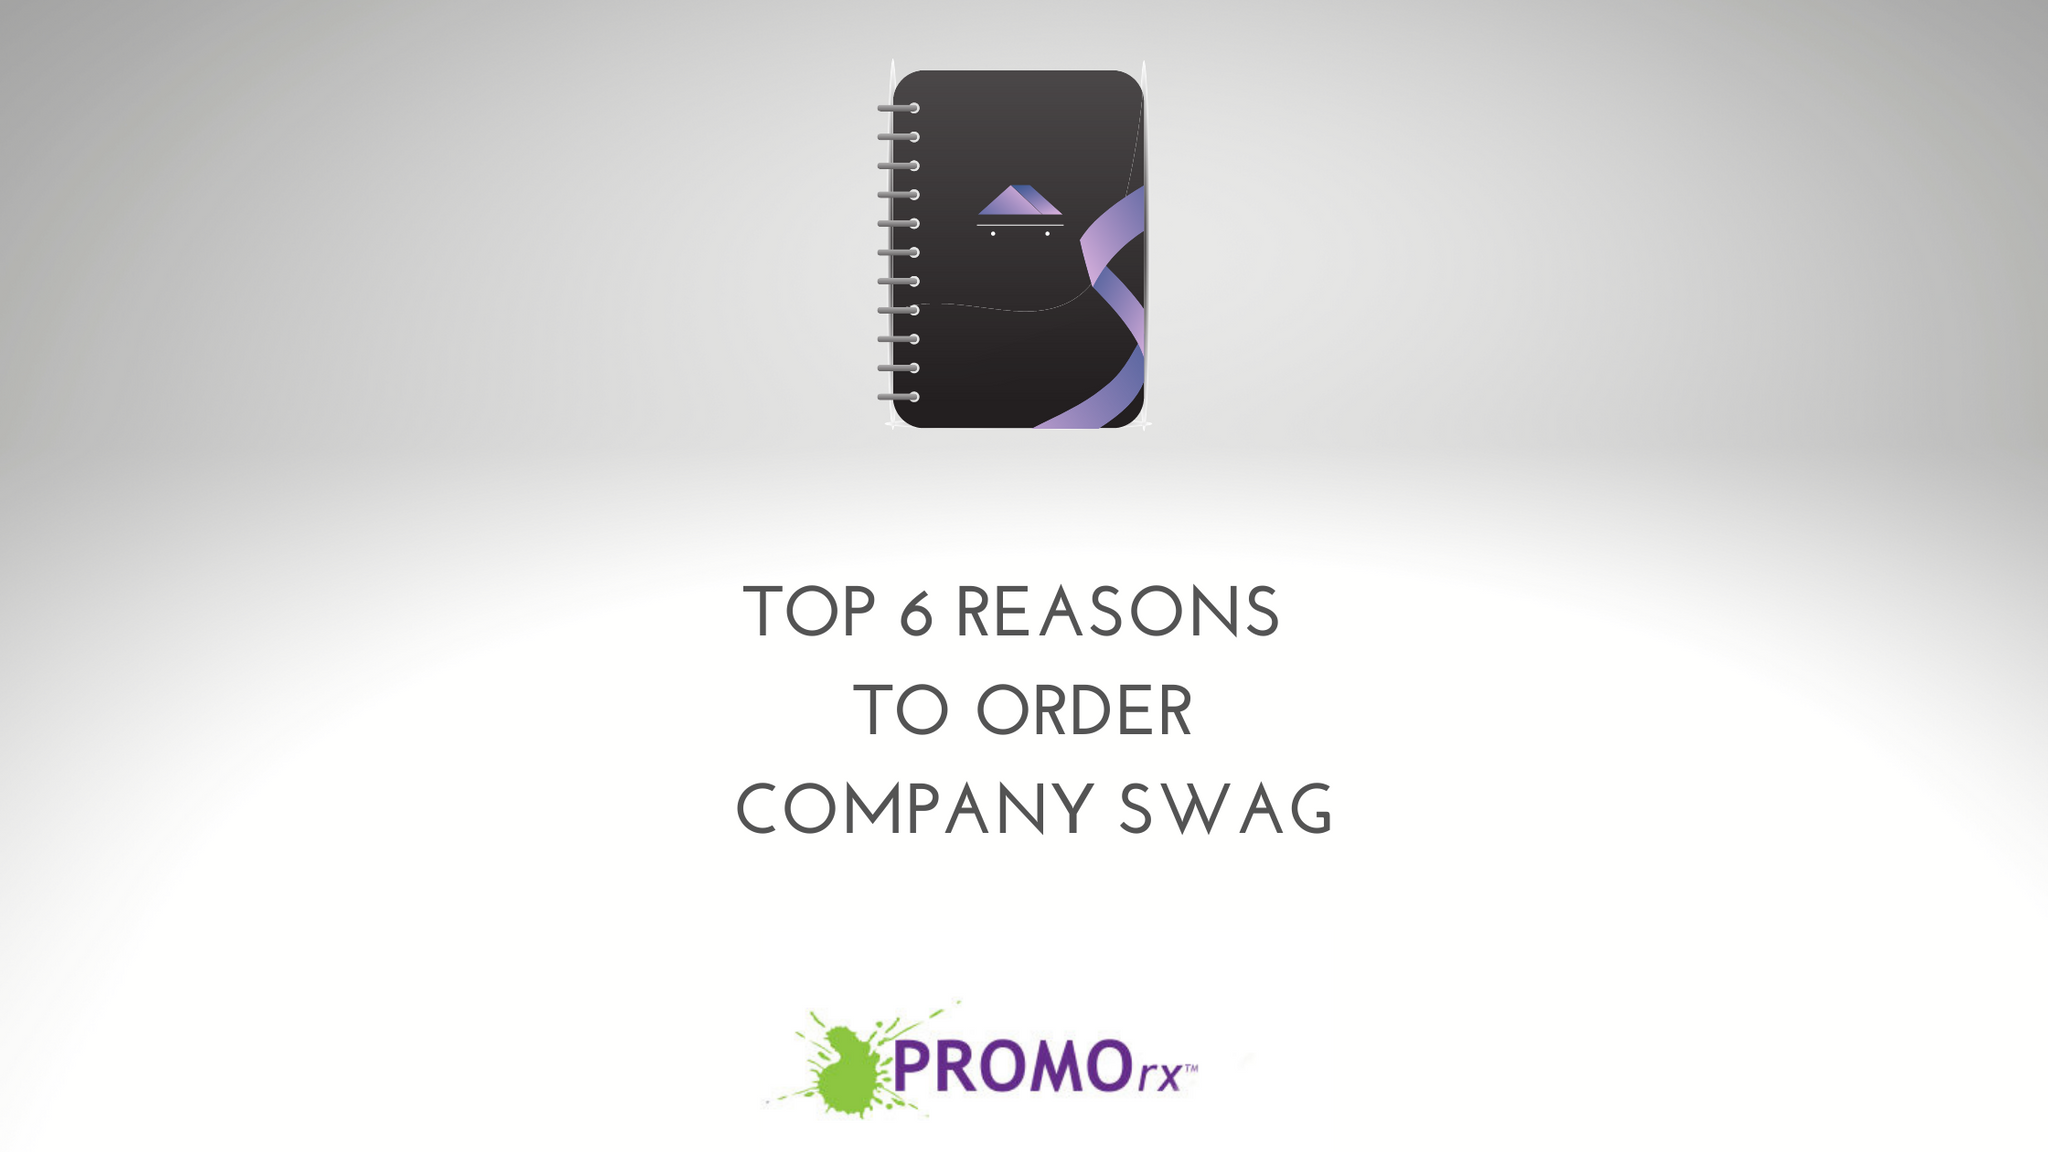 Top 6 Reasons to Order Company Swag